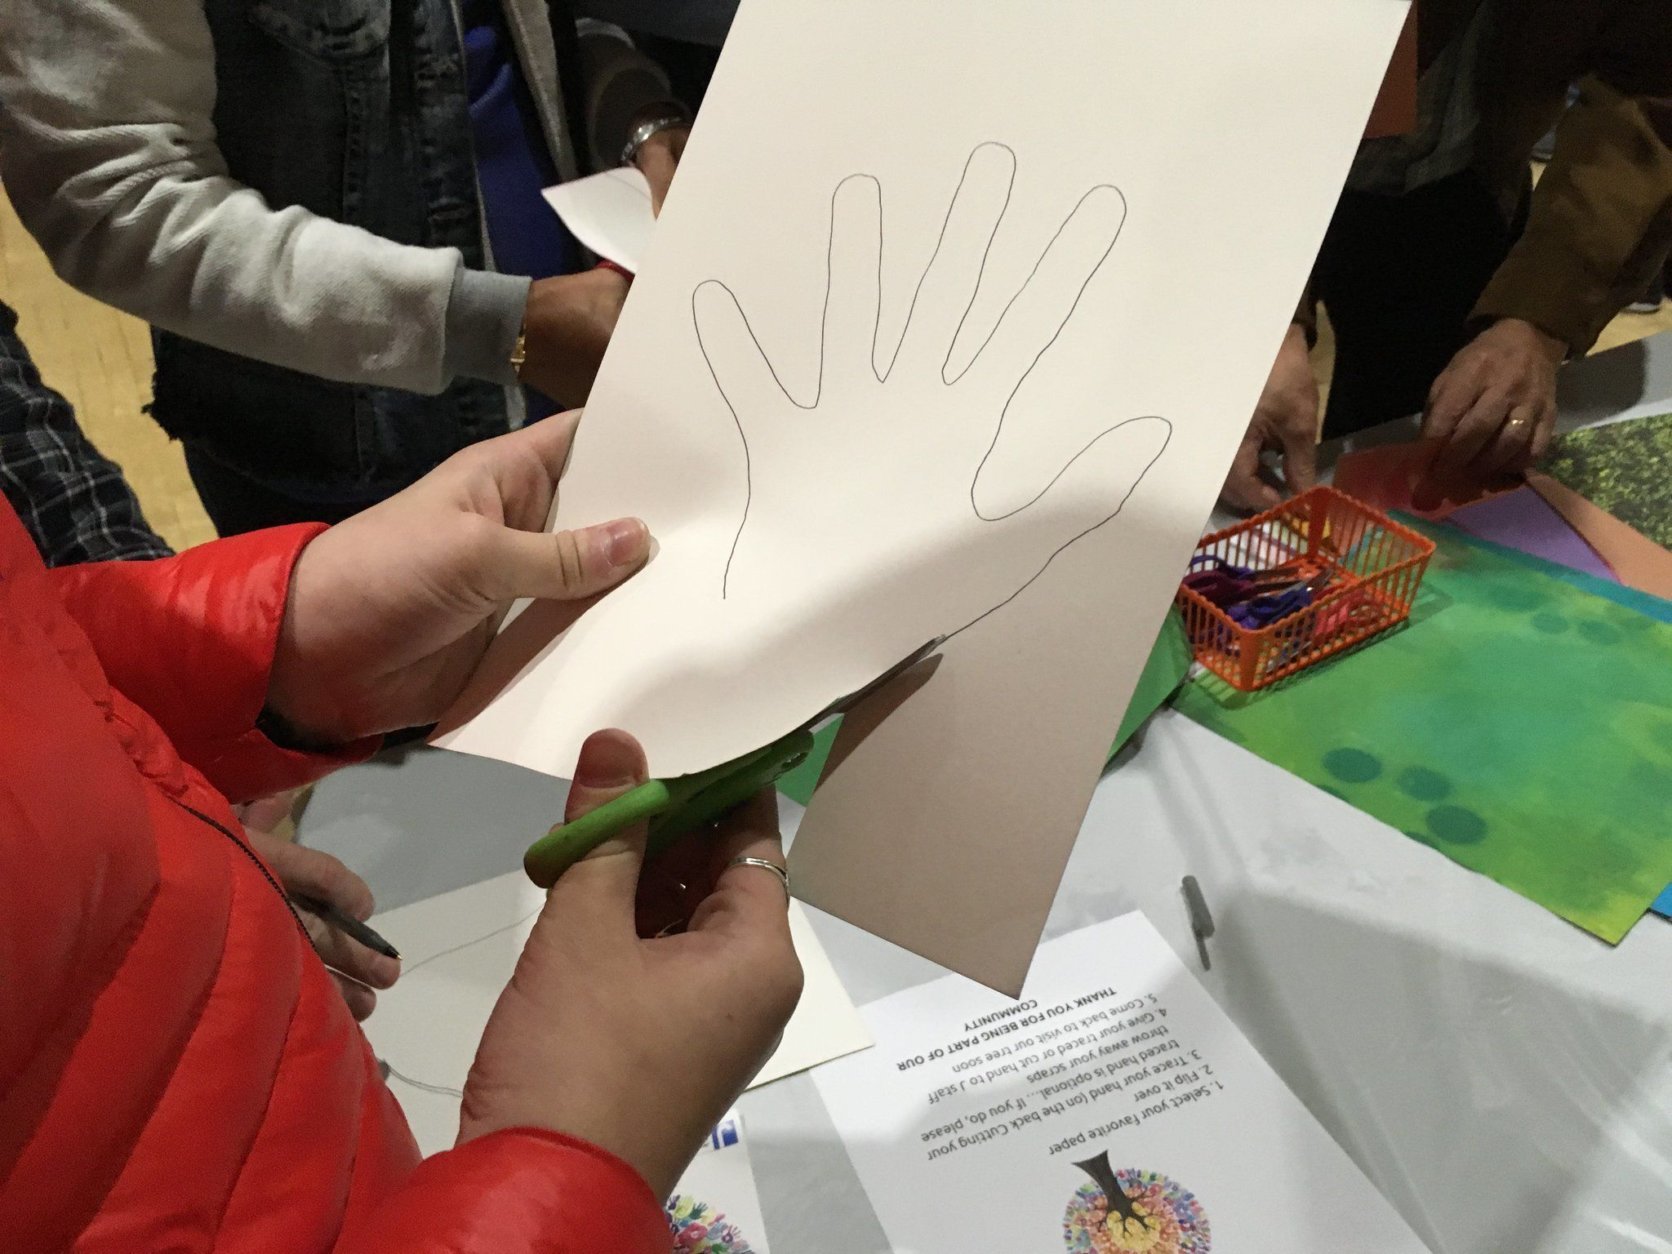 “We had the idea of having people trace their hand prints to both show that they were here in solidarity and to represent the community as a whole,” said Sarah Berry, Cultural Arts Director of the JCC. (WTOP/Liz Anderson)